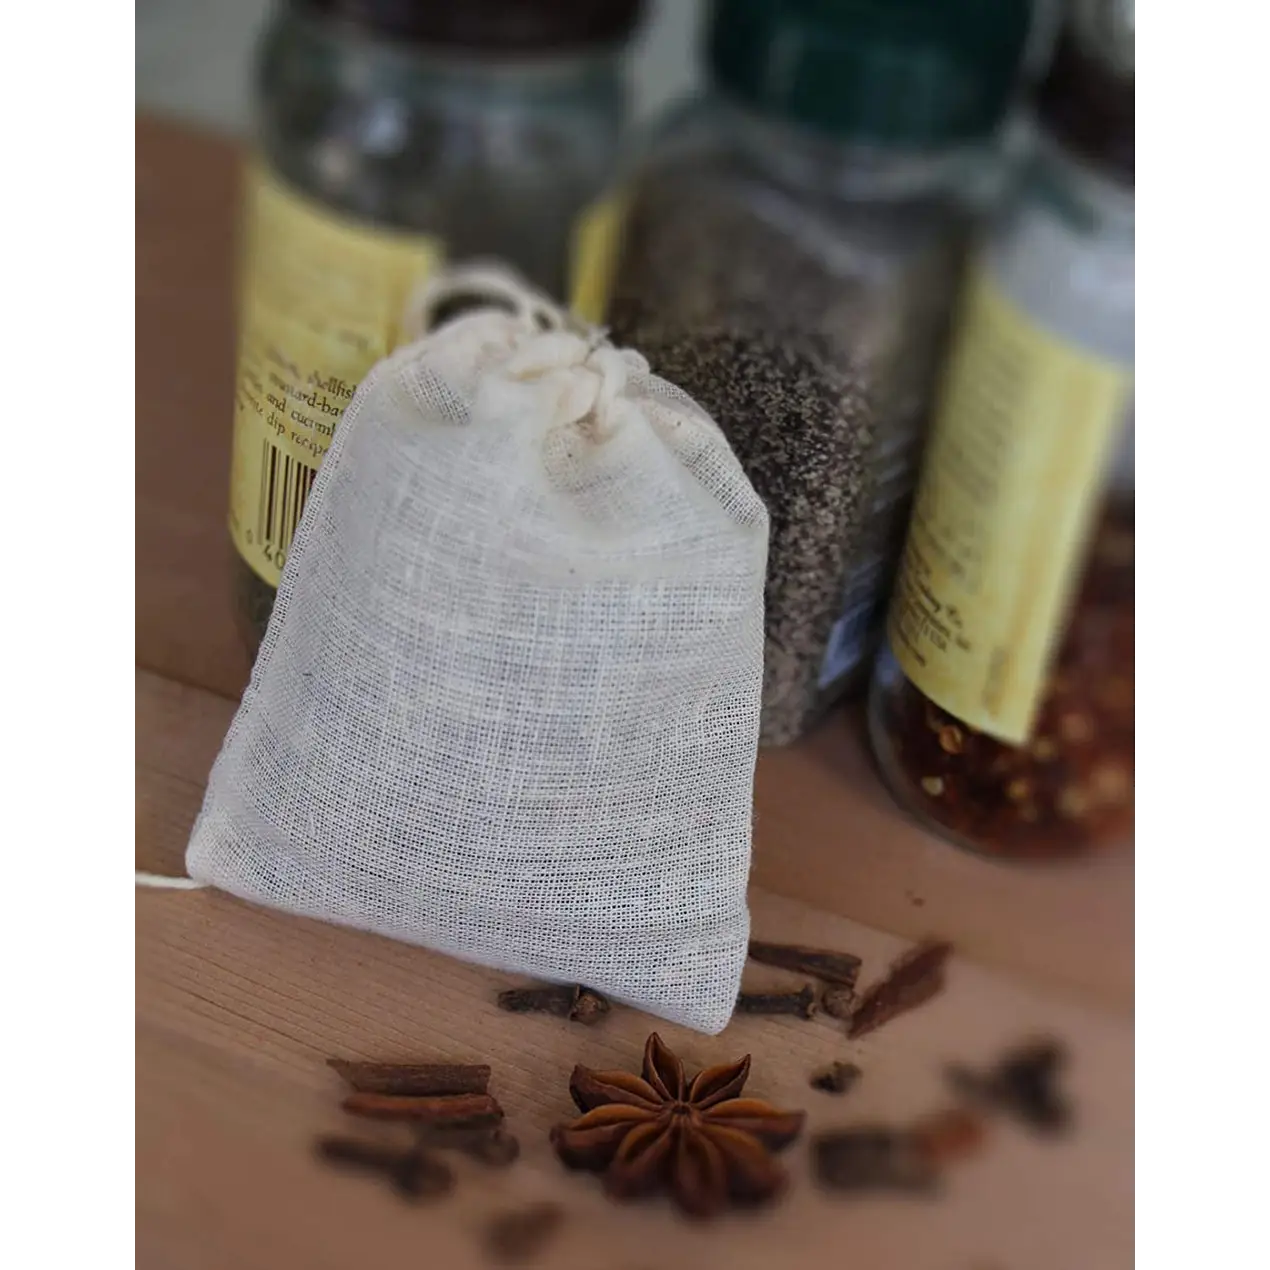 Regency Natural Cotton Spice Bags (Set of 4) RW950N - Misc